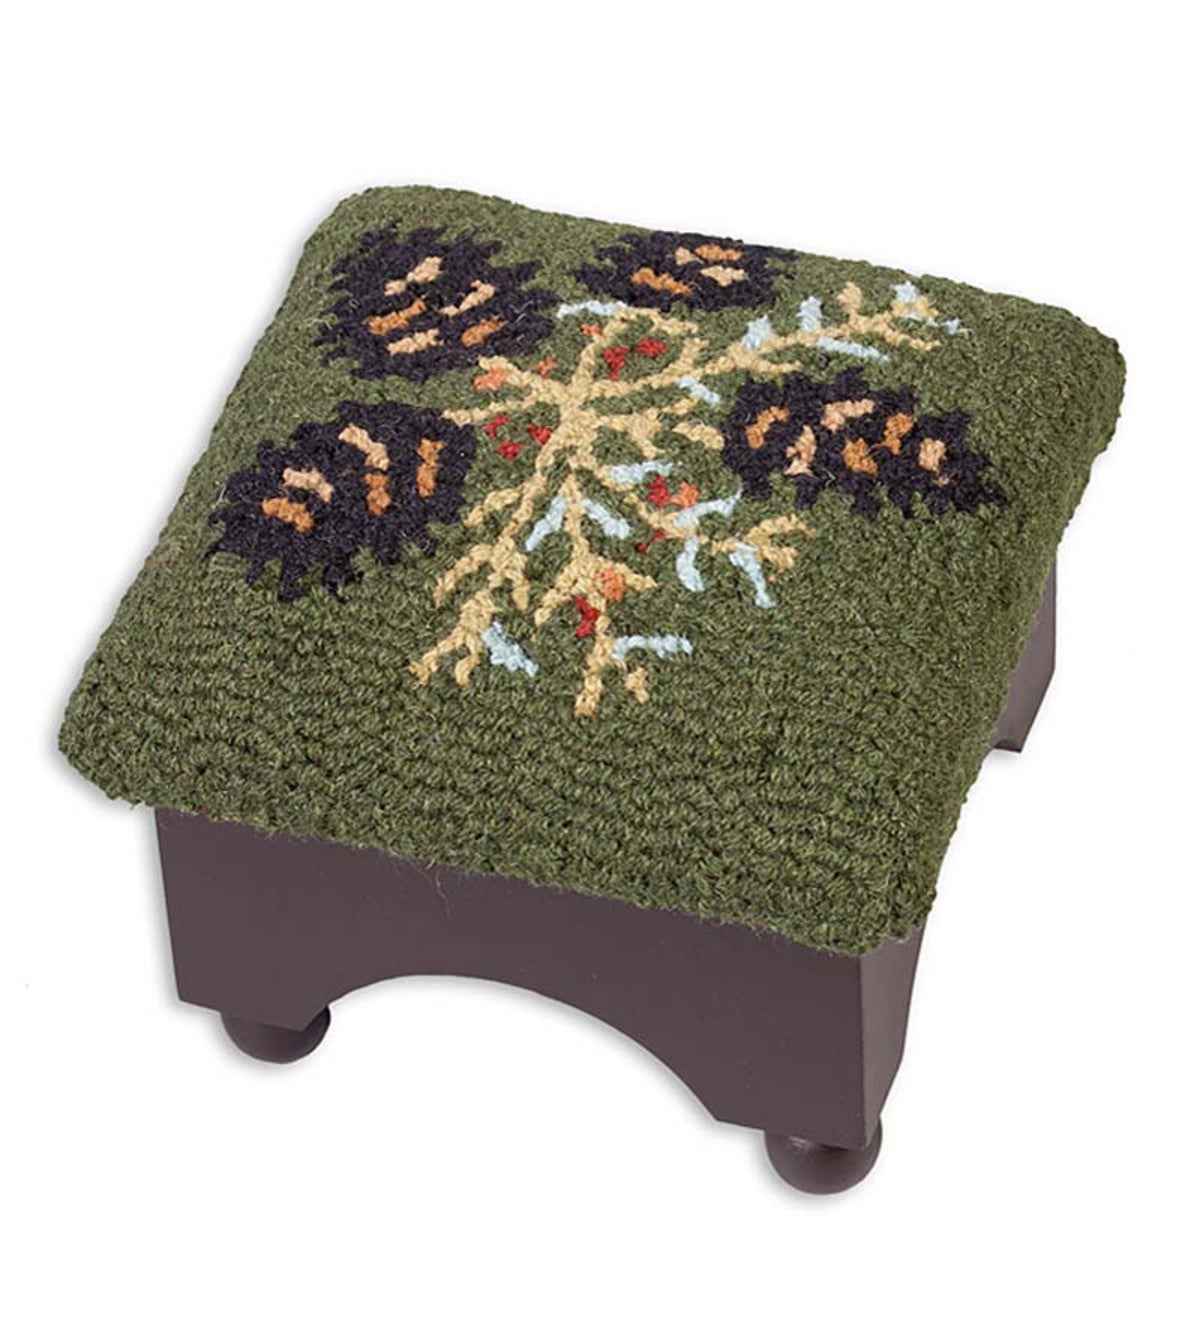 Pine Cone Footstool, 9"H